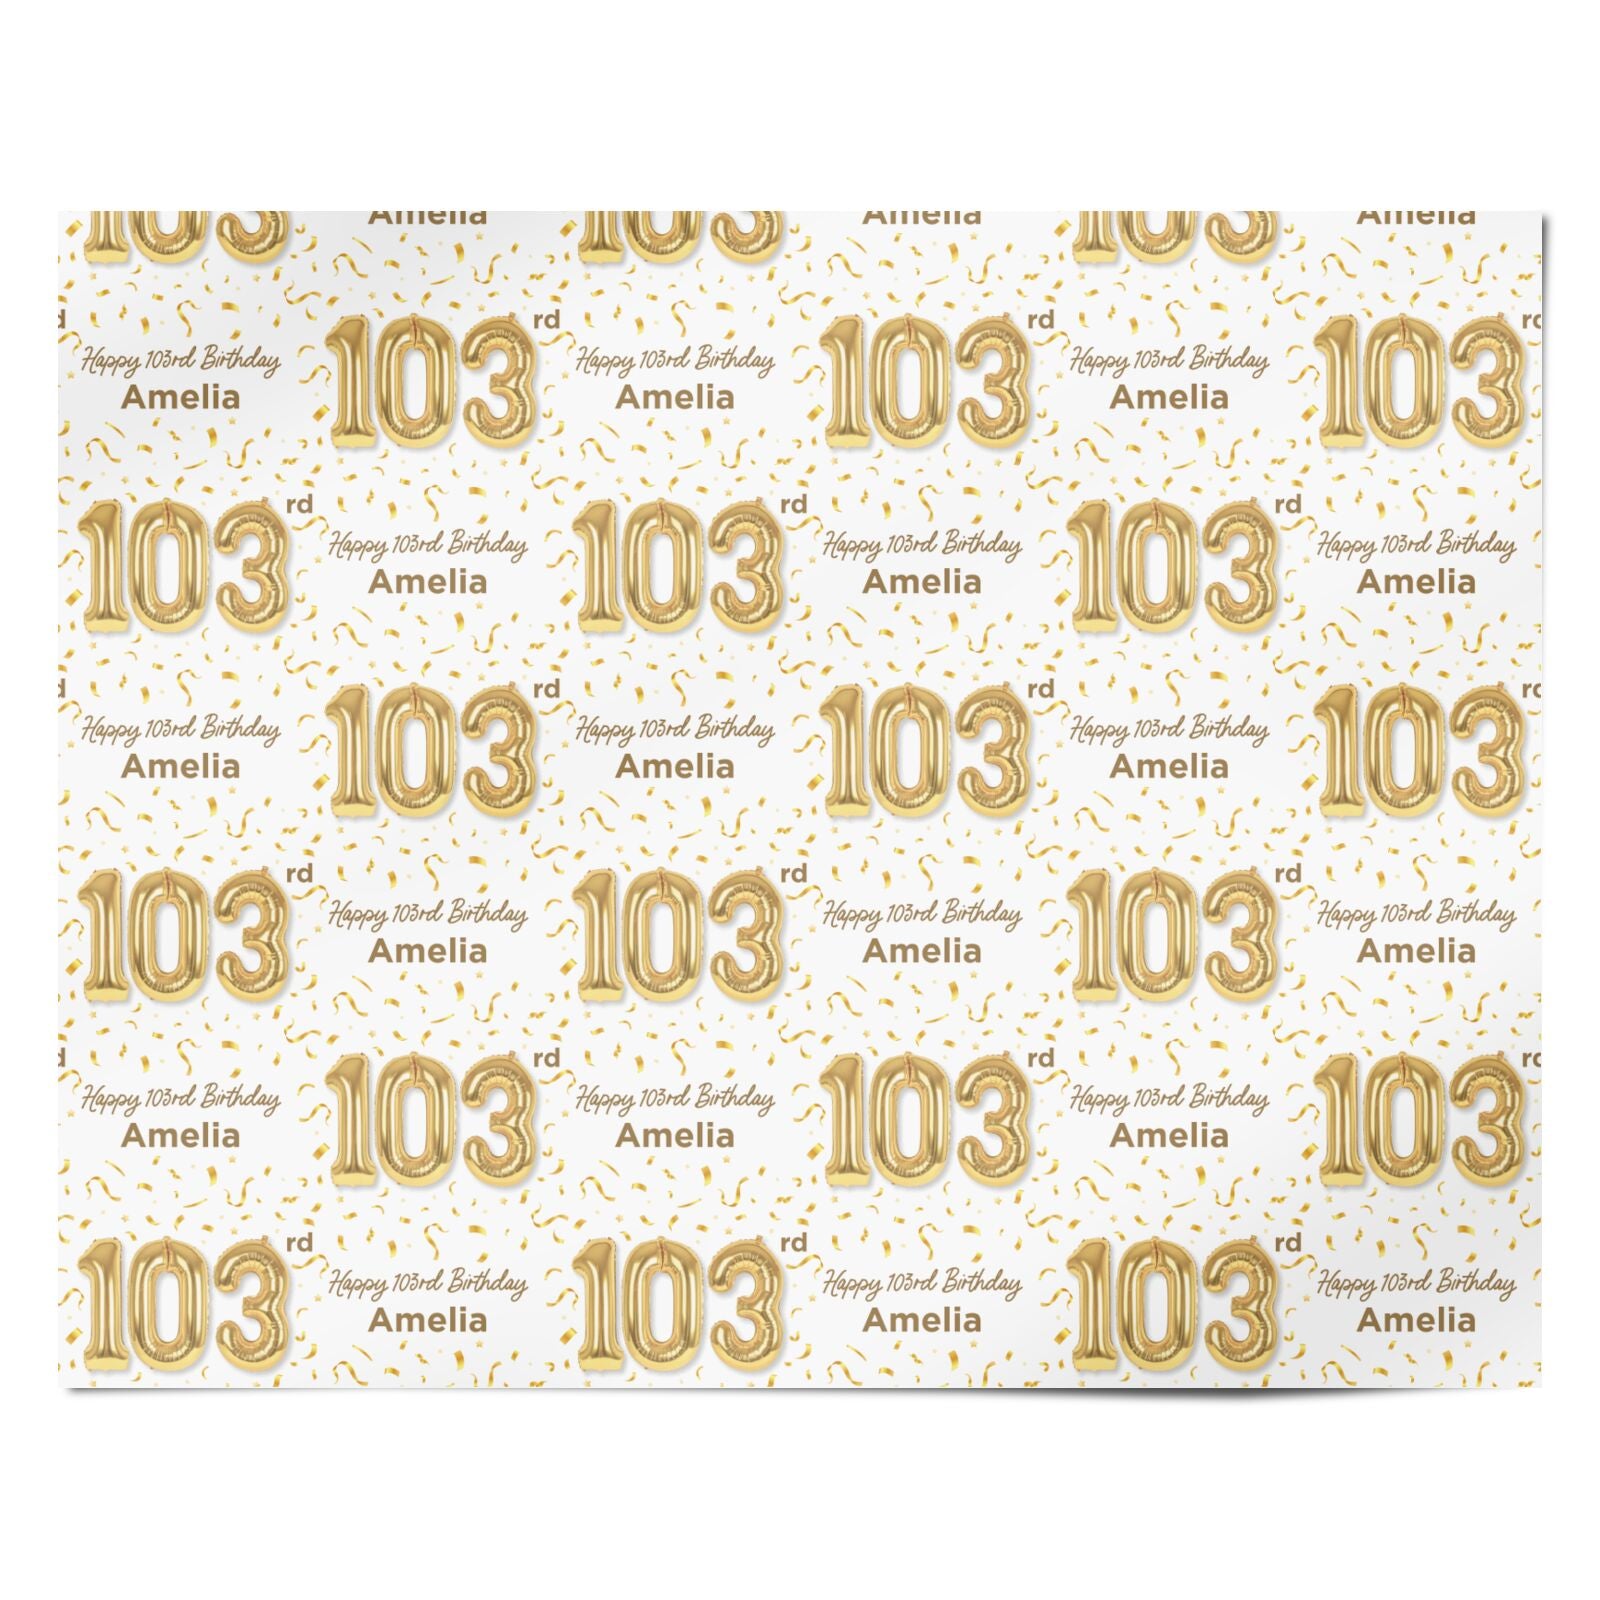 Personalised 103rd Birthday Personalised Wrapping Paper Alternative